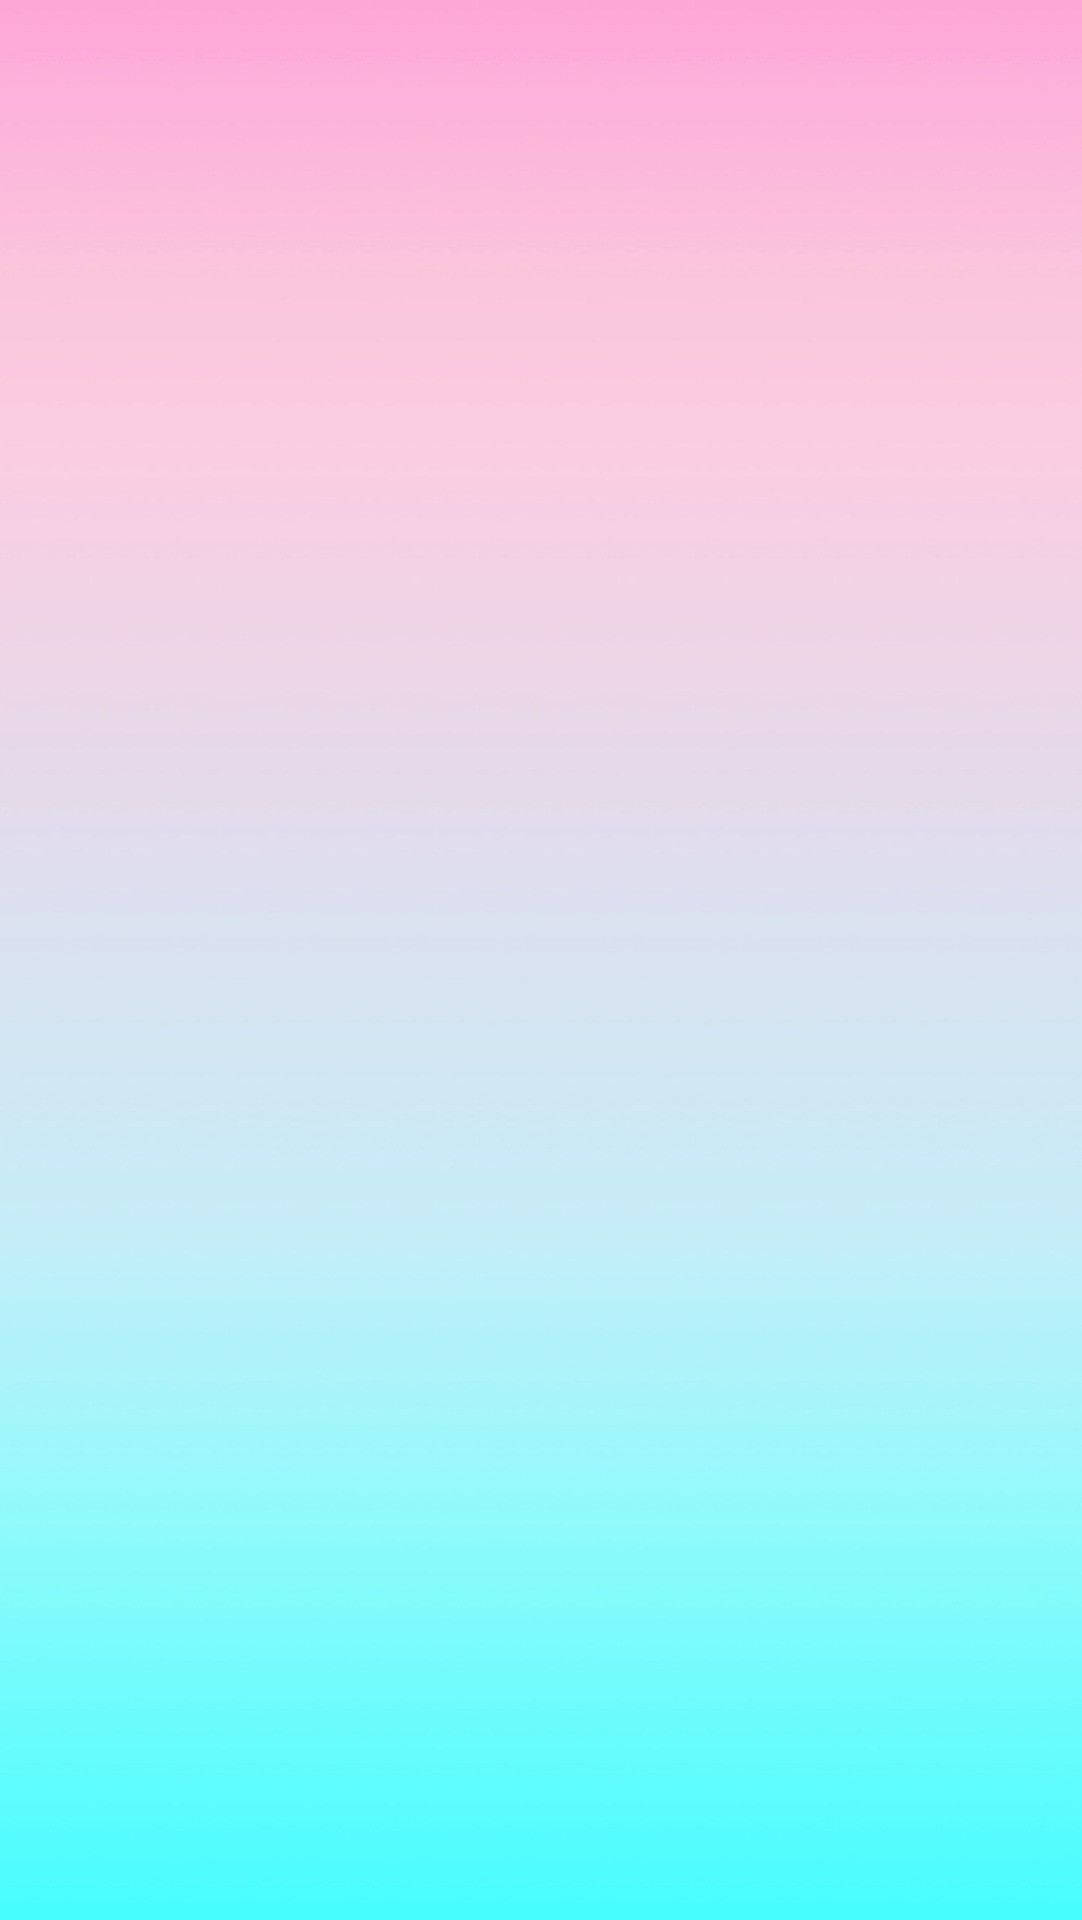 Minimalistic Gradient Backdrop For Iphone Background